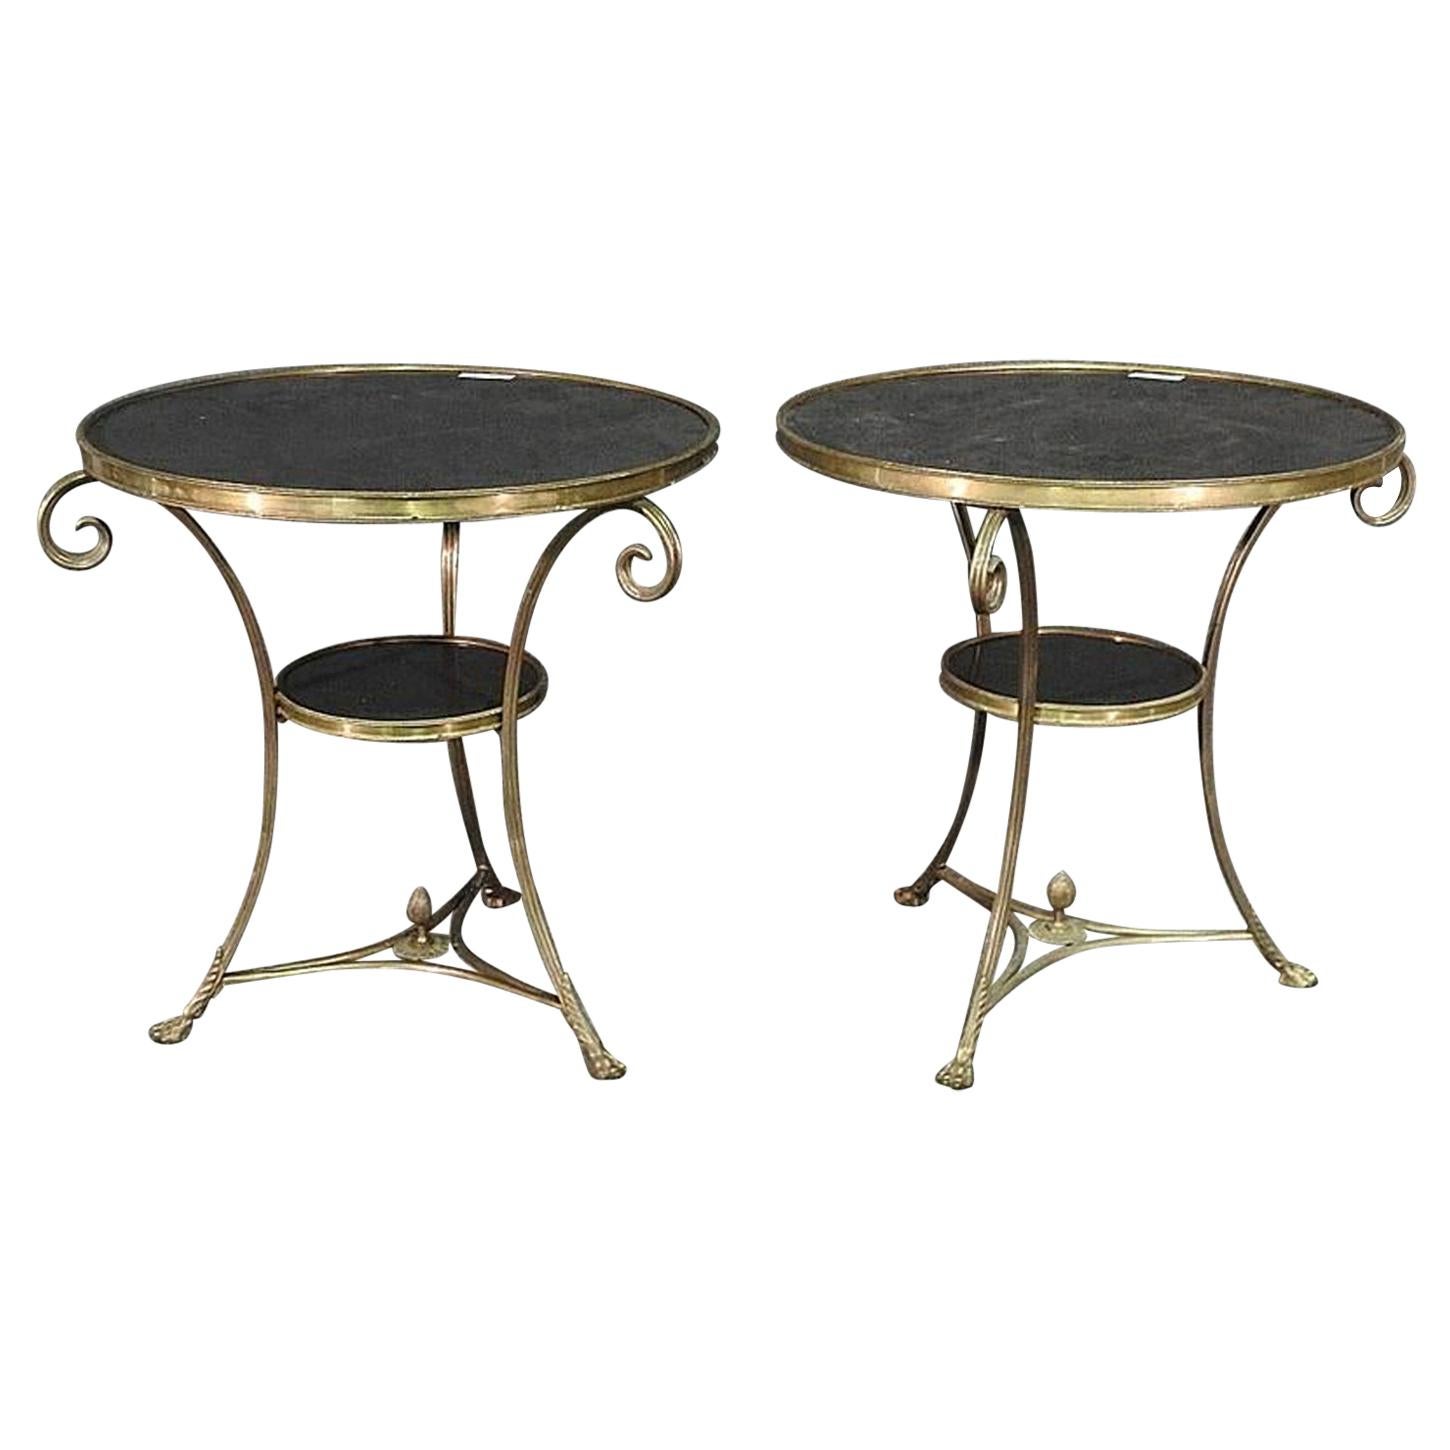 Pair of Solid Brass and Black Granite French Louis XV Style Gueridons End Tables